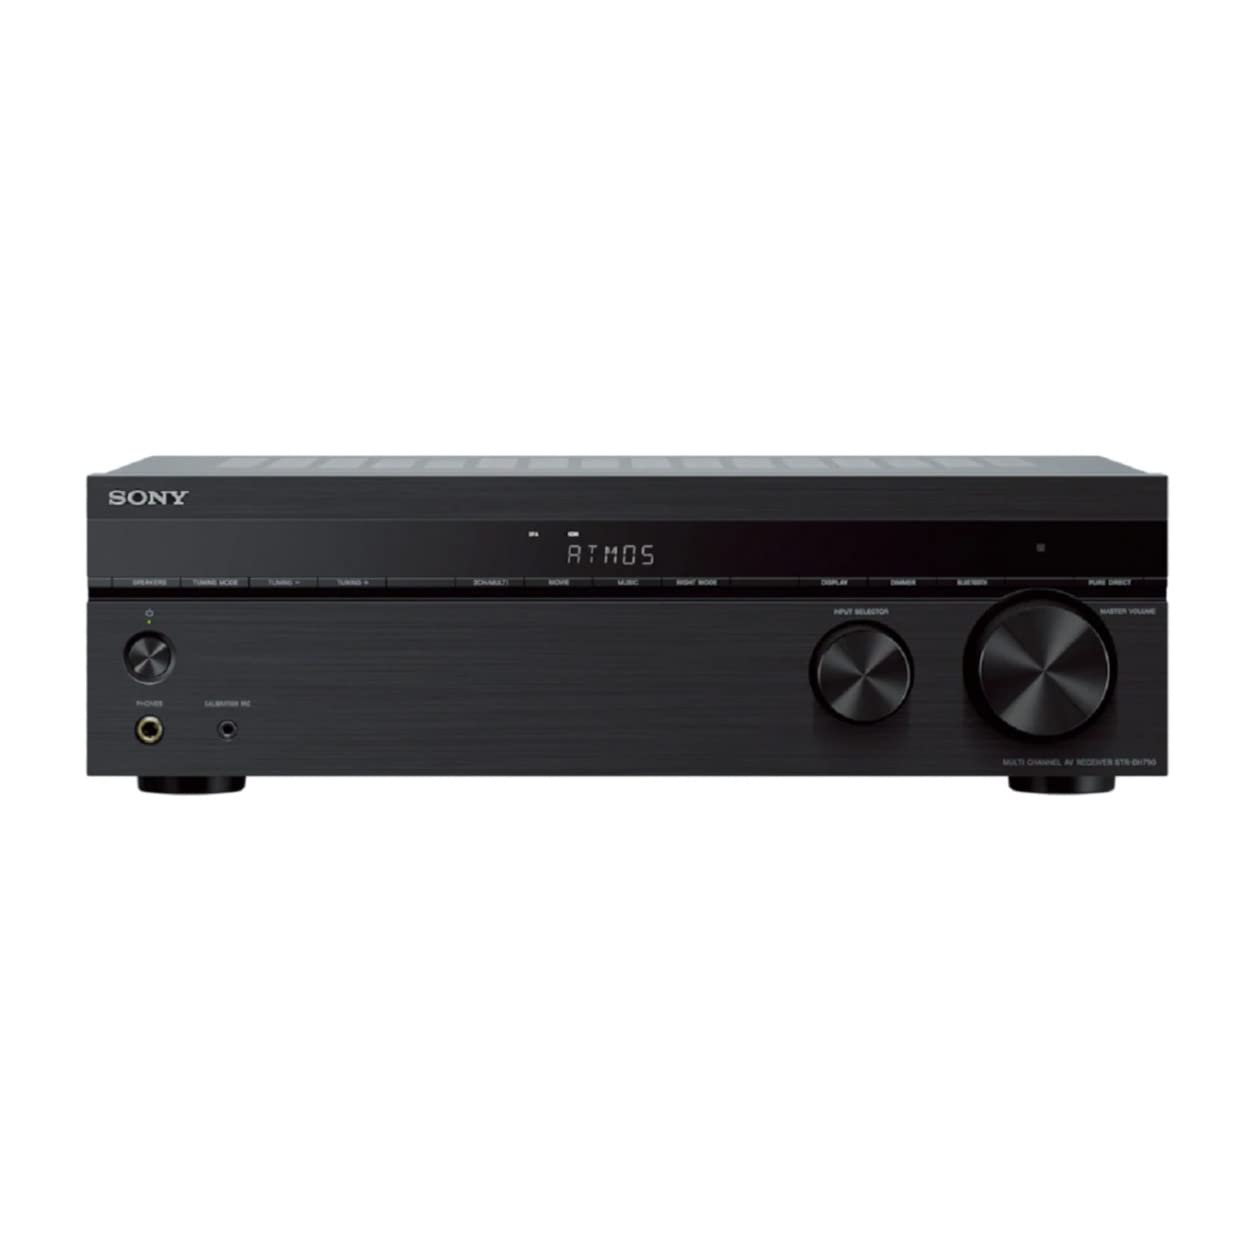 Sony STR-DH790 7.2-ch Receiver, 4K HDR, Dolby Vision, Dolby Atmos, DTS:X, & Bluetooth with Complete SONY 8 Speaker System Bundle